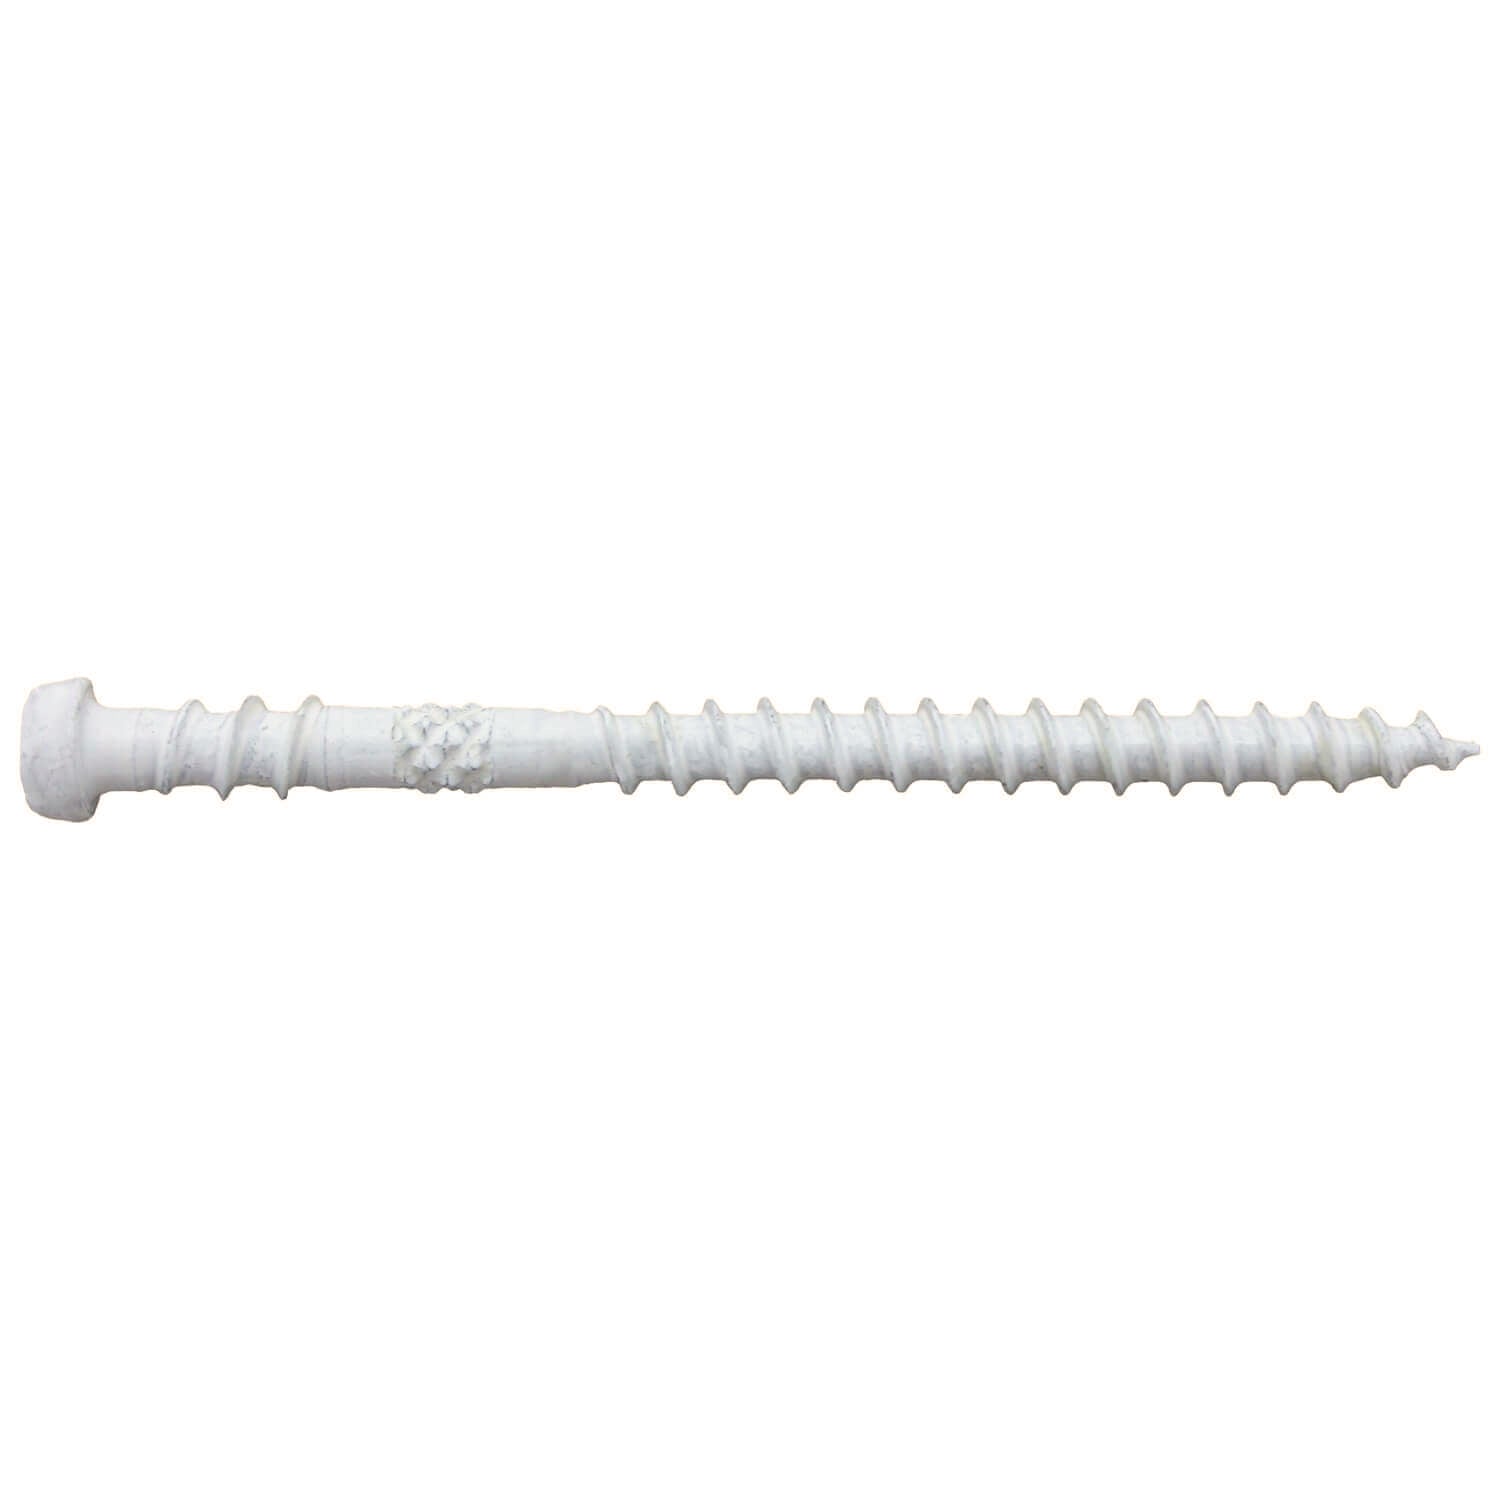 Jake Sales #10 x 2-3/4 WHITE Colored Composite Decking Wood Screw